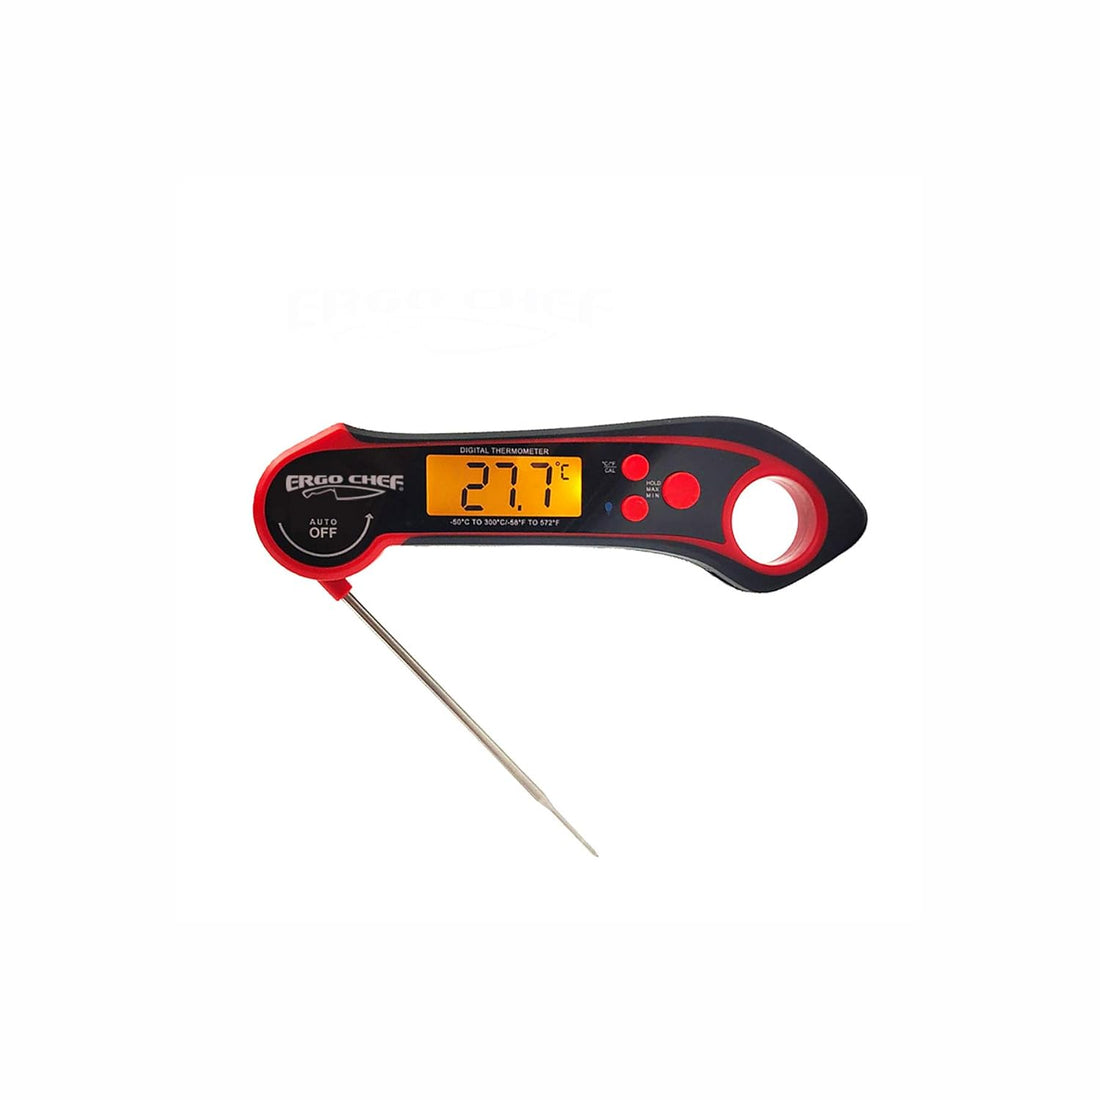 Ergo Chef Digital Instant Read Meat Thermometer- Waterproof, Precise, Backlight, Foldable Probe, Magnet, Calibration- for Indoor and Outdoor Cooking, BBQ, Grill, Smoking, Deep Fry, Baking & Liquids